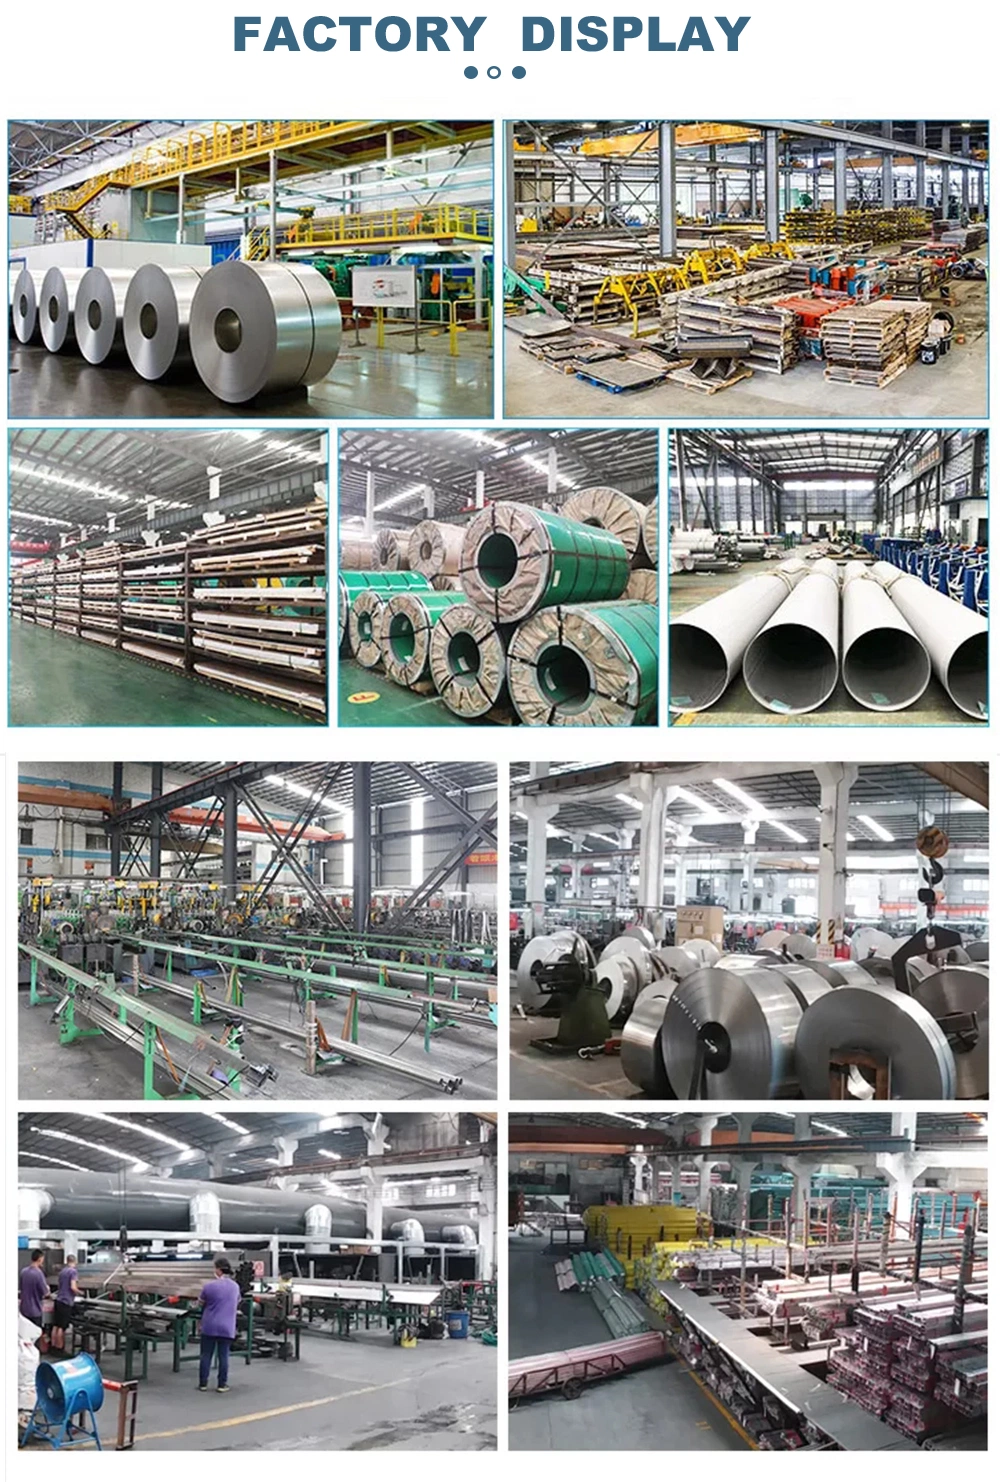 S275j0 6mm-20mm Thick API 5L X42 X52 X56 X60 Steel Pipe SSAW Welded Spiral Steel Pipe Used for Water Well Casing Pipe Factory Price